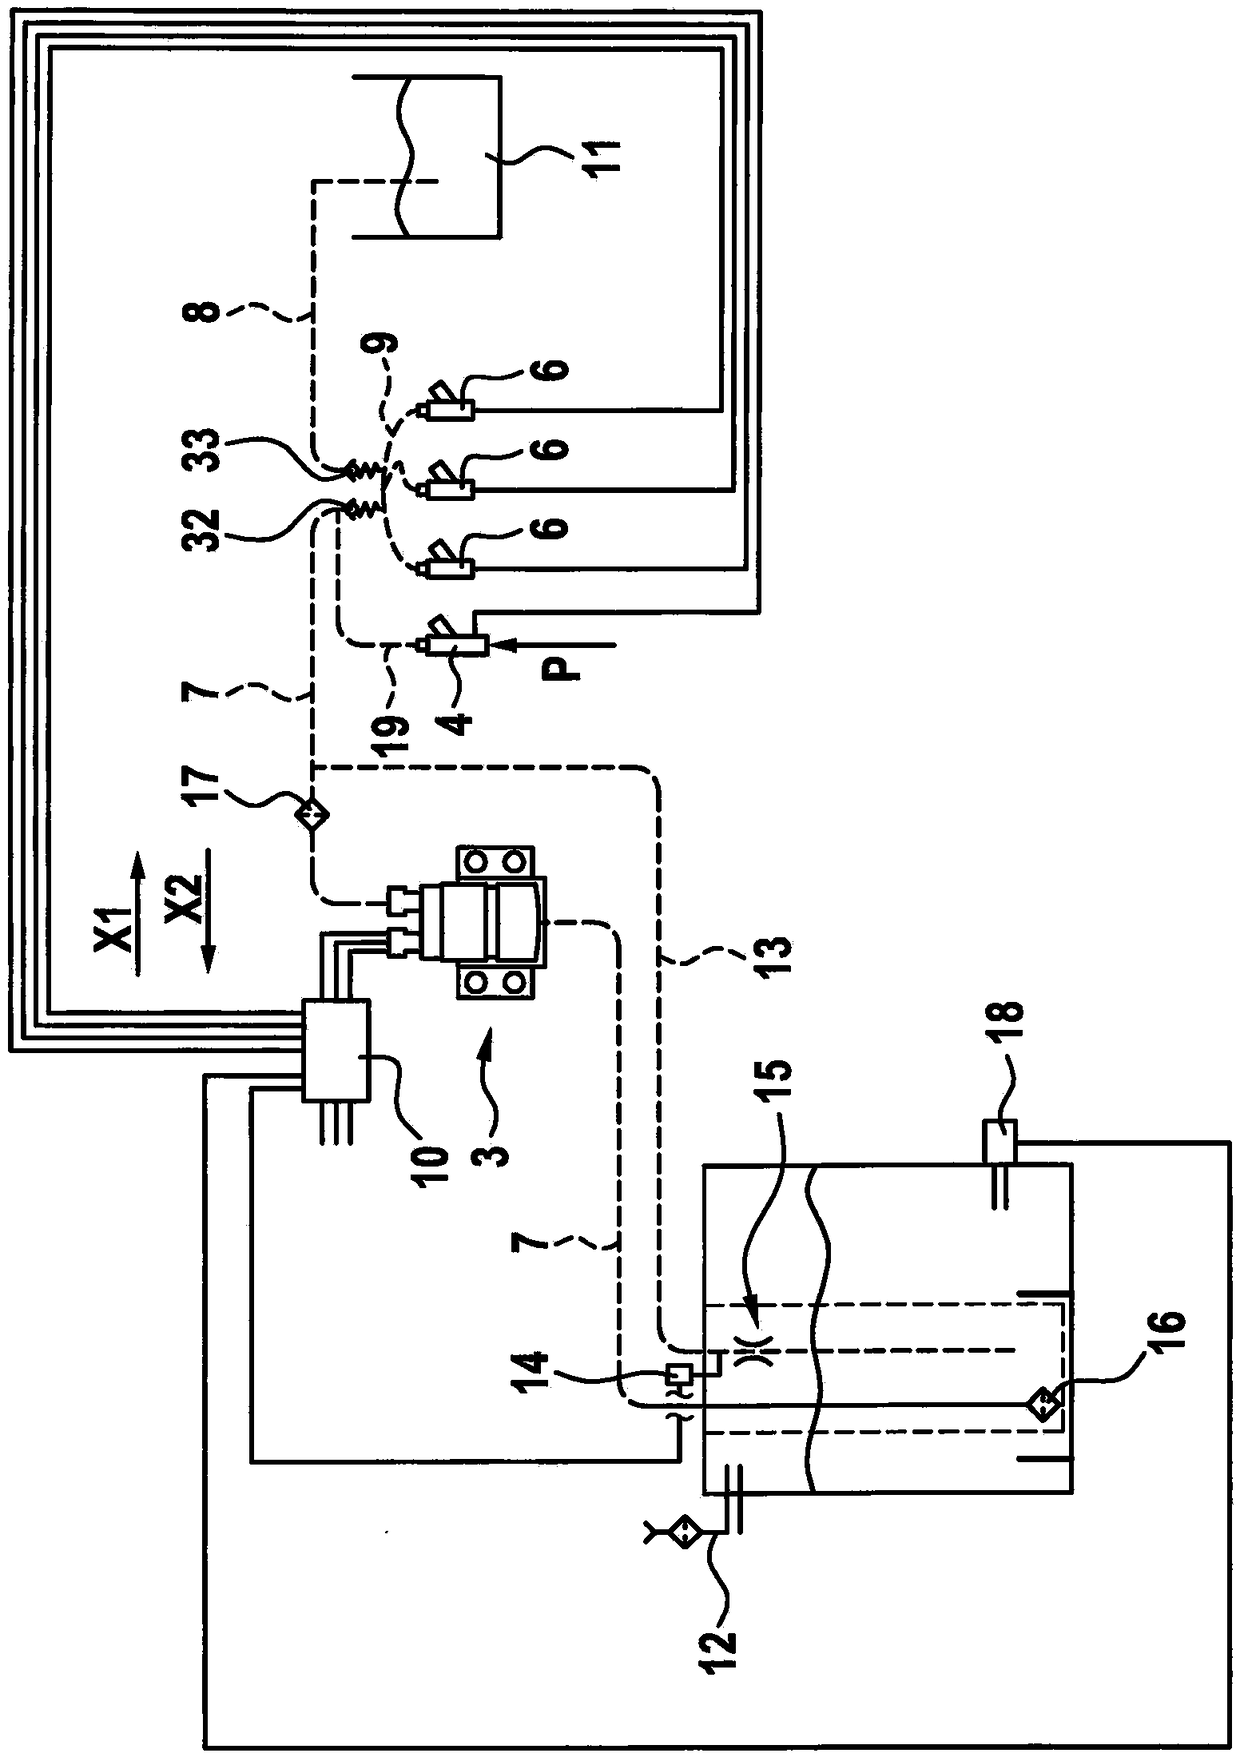 Water injection device of a combustion engine and method for operating same